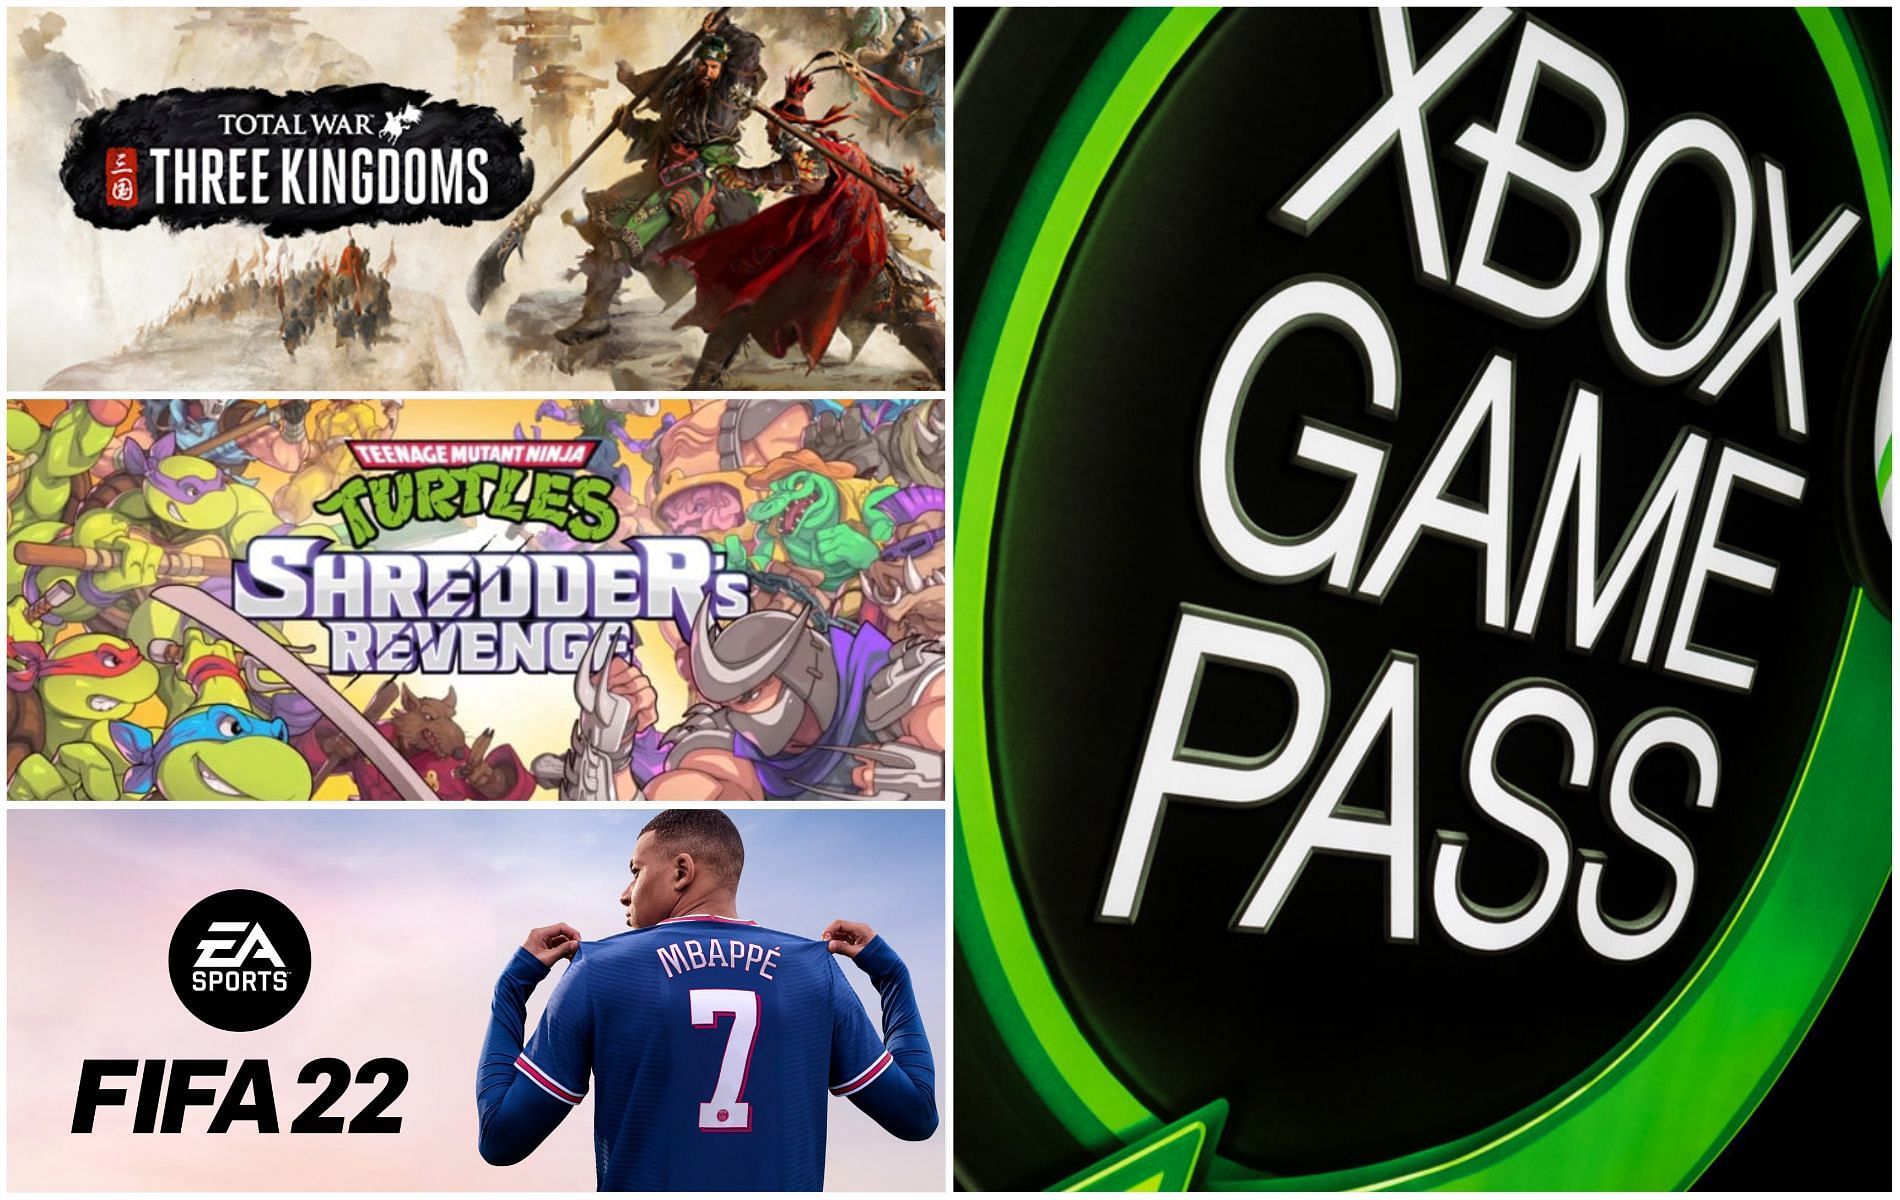 Xbox Game Pass adds new titles for June 2022 - TMNT: Shredder's Revenge,  Total War: Three Kingdoms, FIFA 22, and more